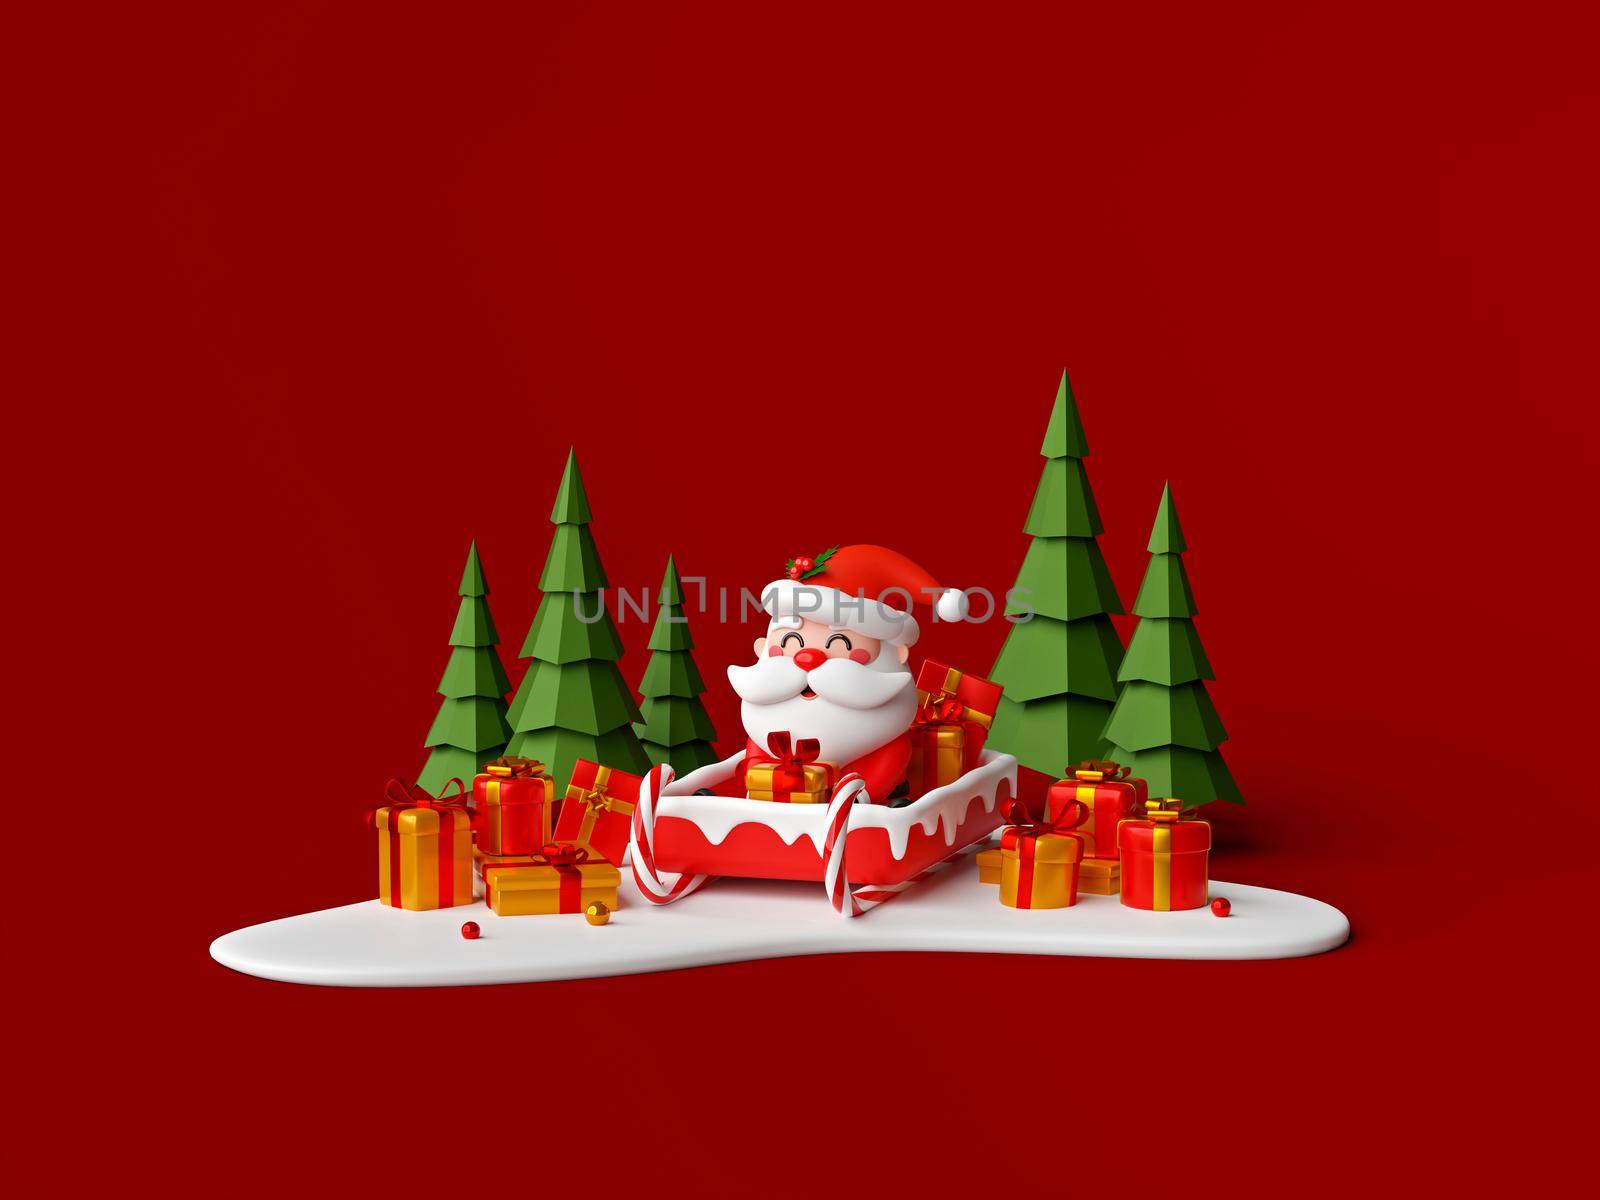 3d illustration of Santa Claus on sleigh with gift on snow ground